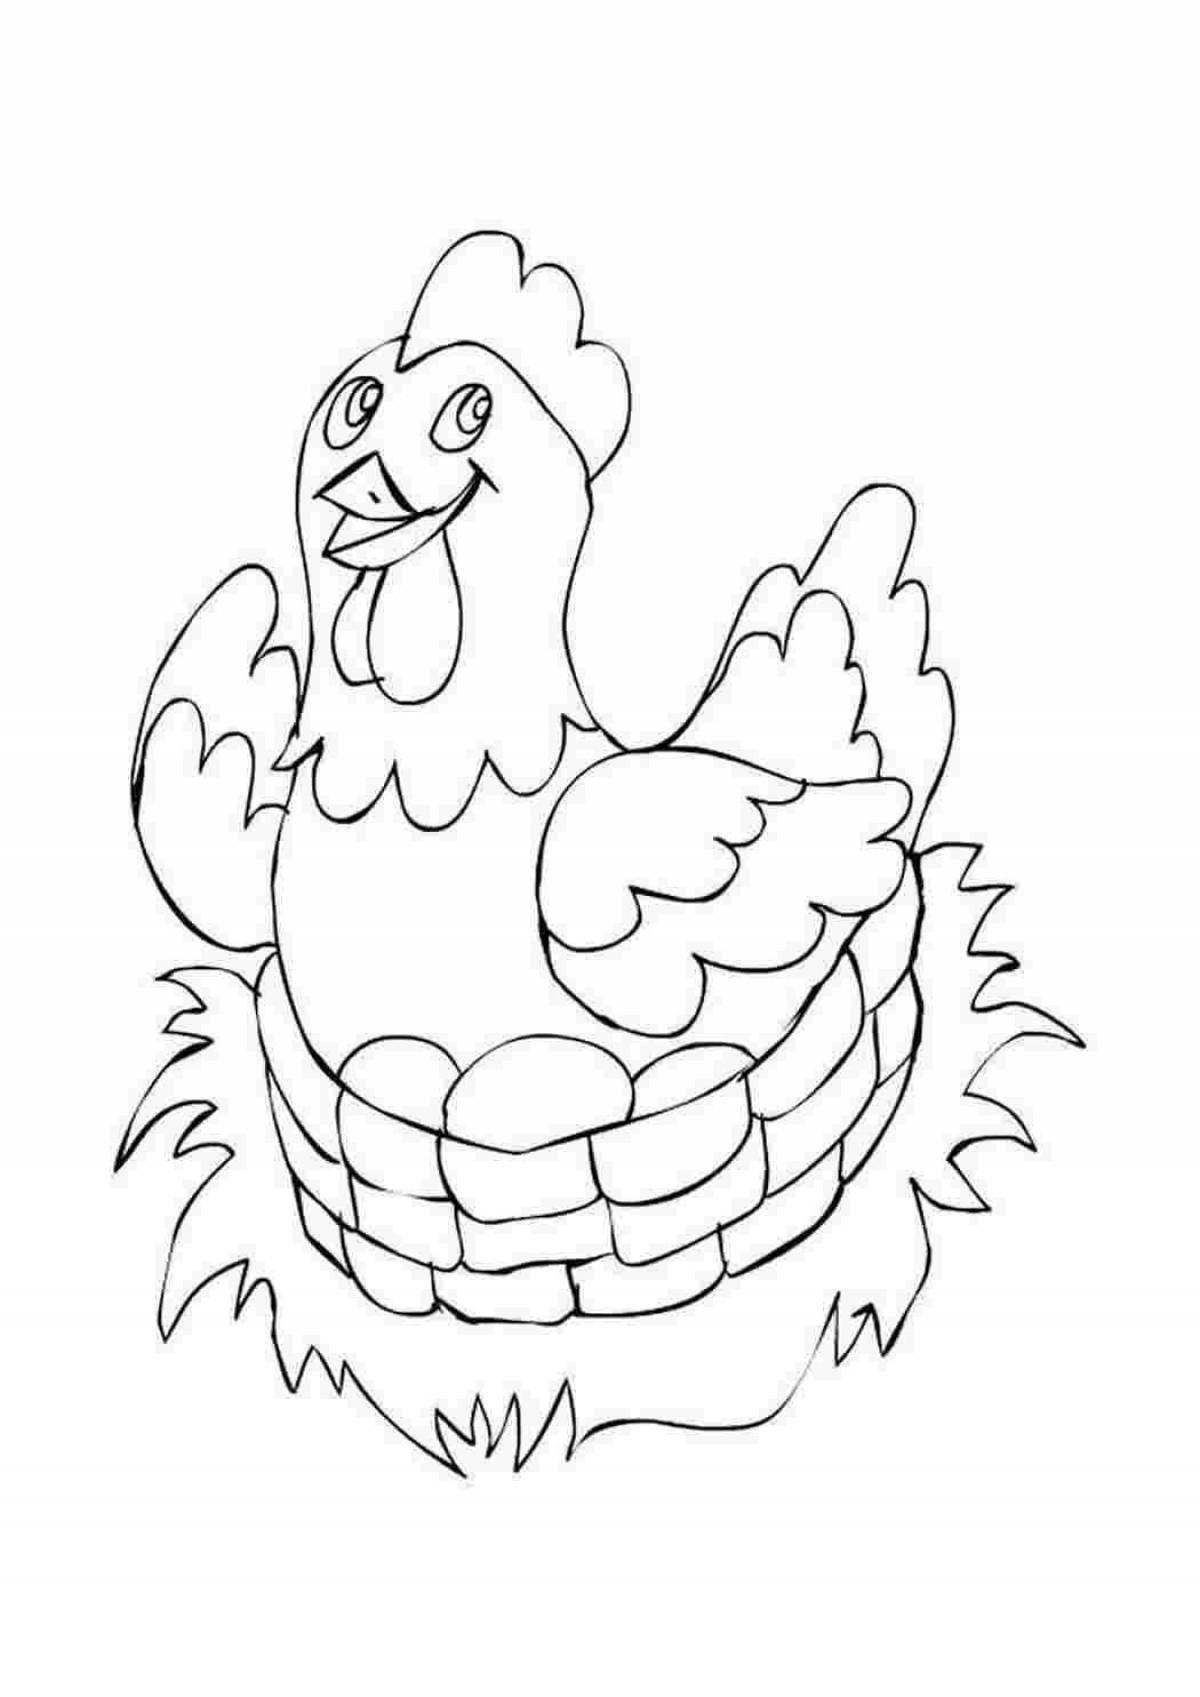 Cute chick coloring for kids